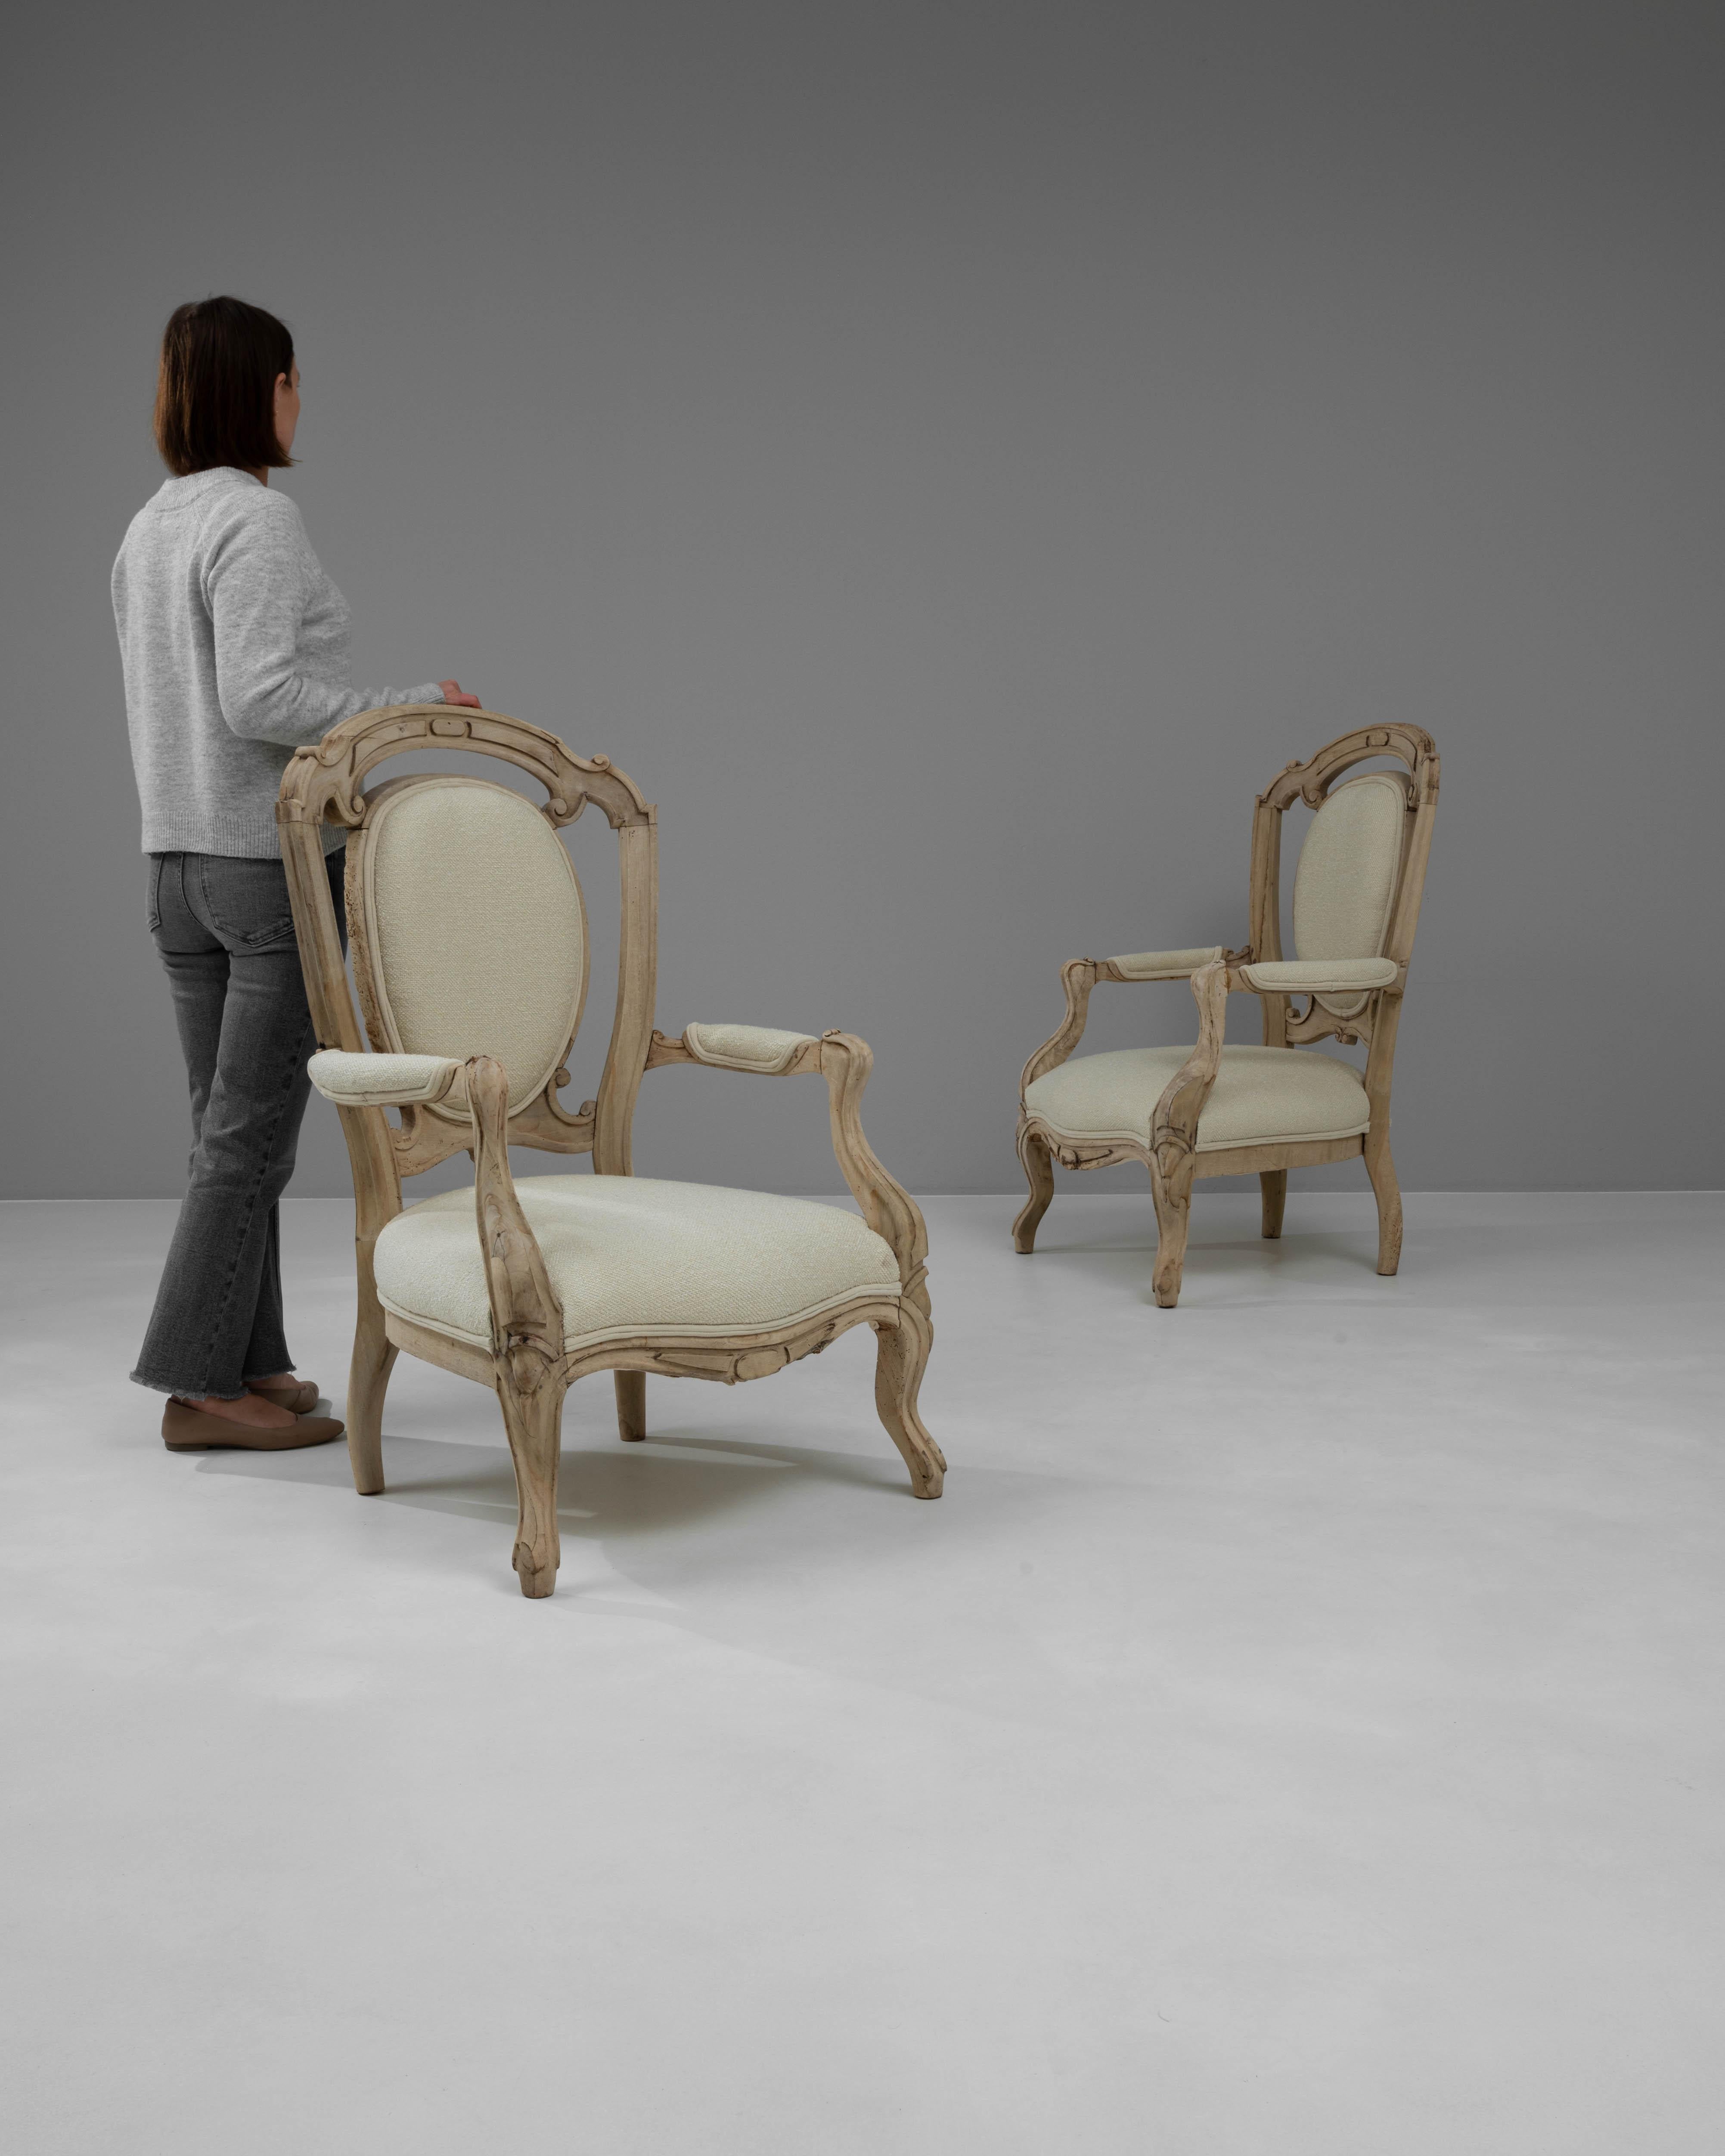 Enhance your living space with this exquisite pair of 19th Century French Bleached Oak Upholstered Armchairs, each radiating a timeless elegance and old-world charm. Crafted from beautifully bleached oak, these chairs showcase the natural beauty and